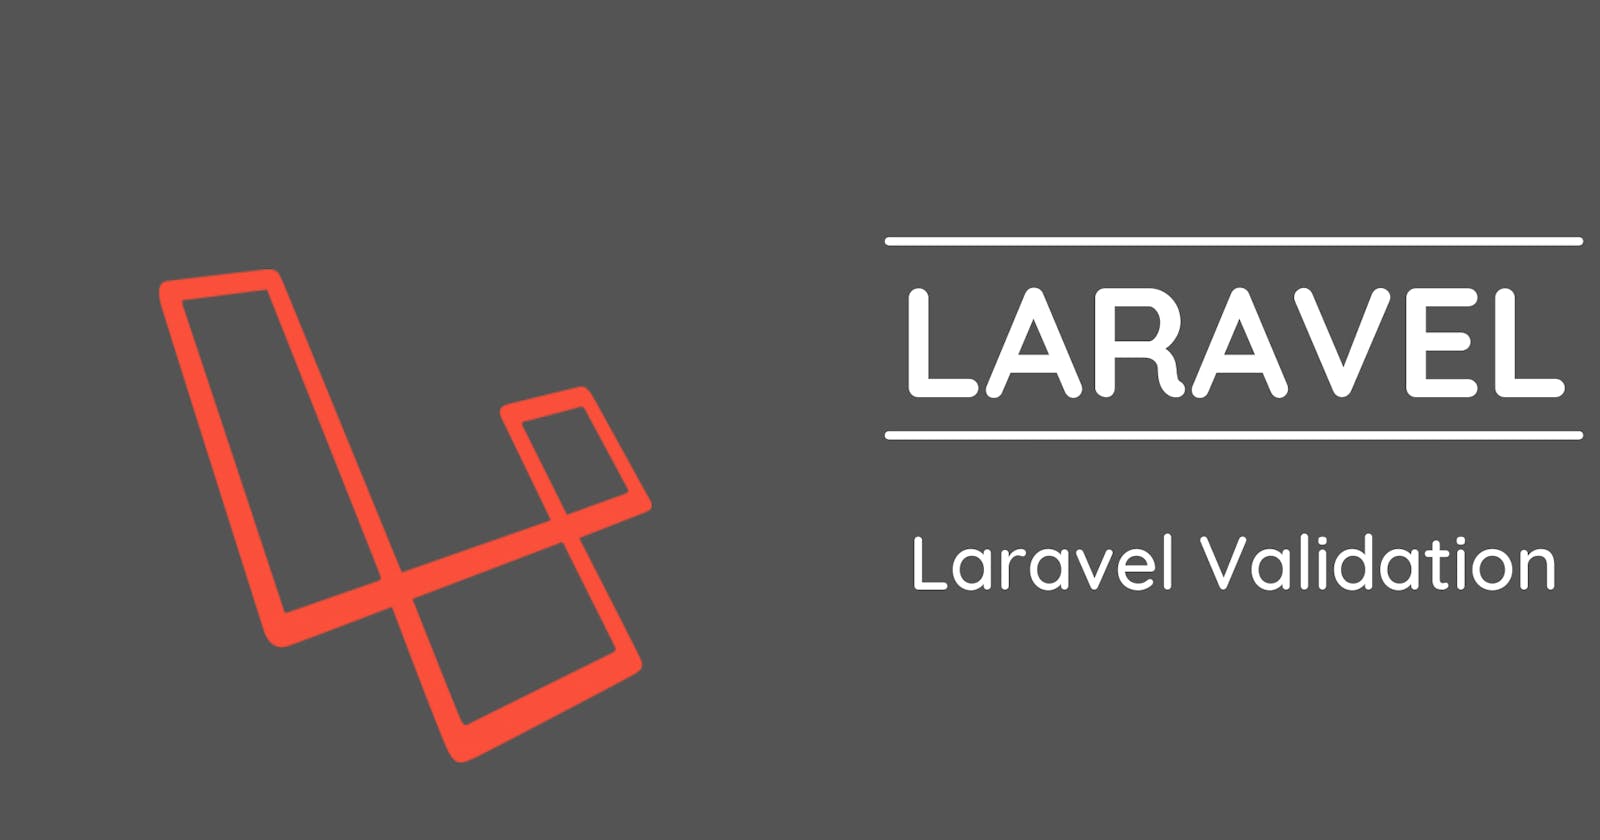 Laravel Validation is unique/exists with different database connection